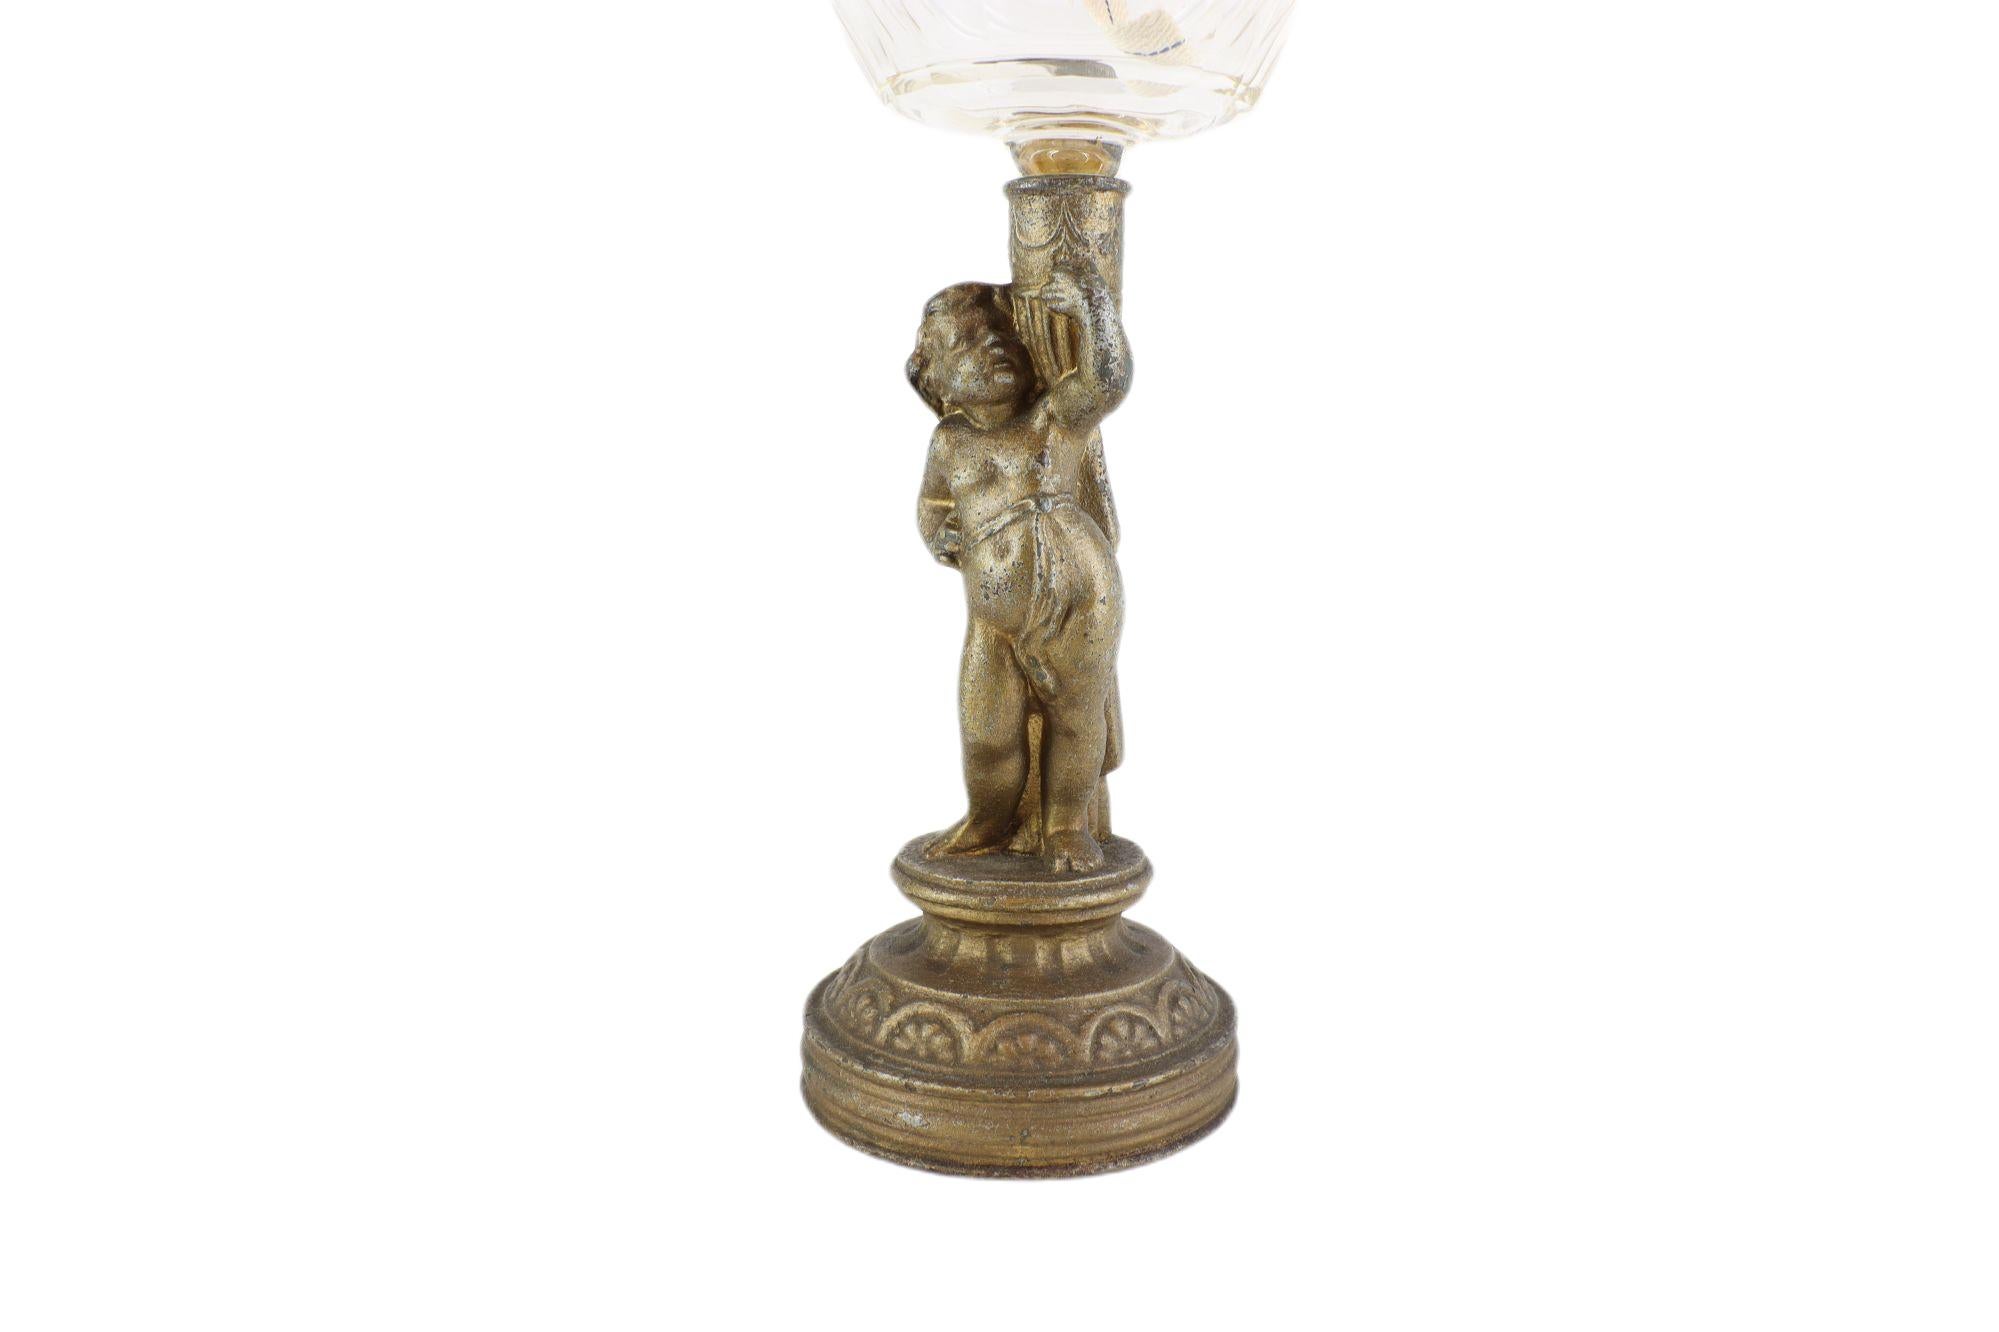 This beautiful processing of a figural kerosene lamp was created in the workshops of the Vienna company R.DITMAR WIEN, which in its time specialized in the production of kerosene lamps.

Specifically, this lamp was made around 1900, is in its